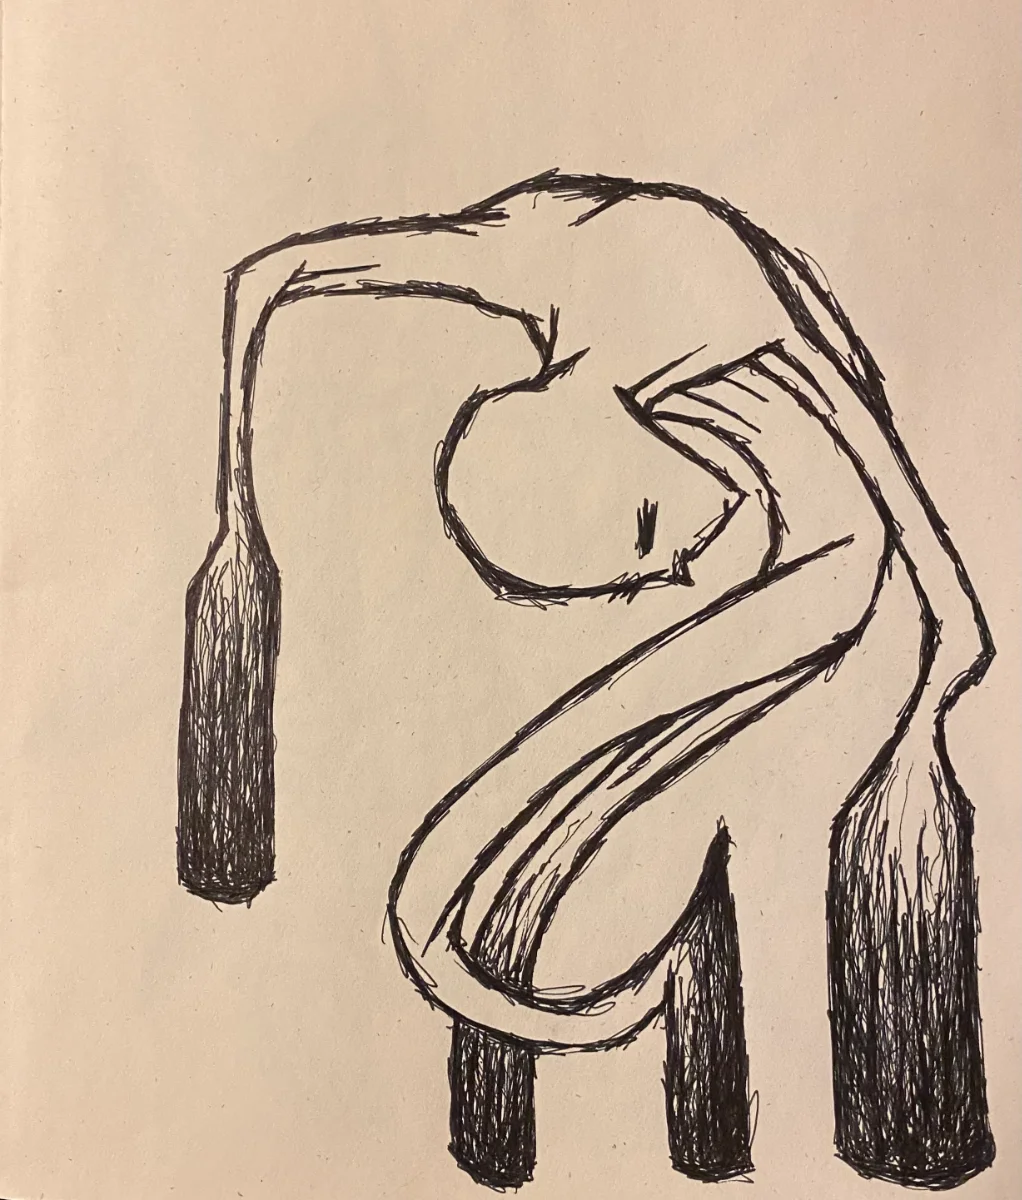 Black pen ink on brown sketch paper drawing of a human-type figure that is bent and looking downward. The figure is hairless and thin. Its very curved extremities end in cylindrical blocks that are gradually filled-in black. This makes the figure look like it is suffering from great weight on its hands and feet.